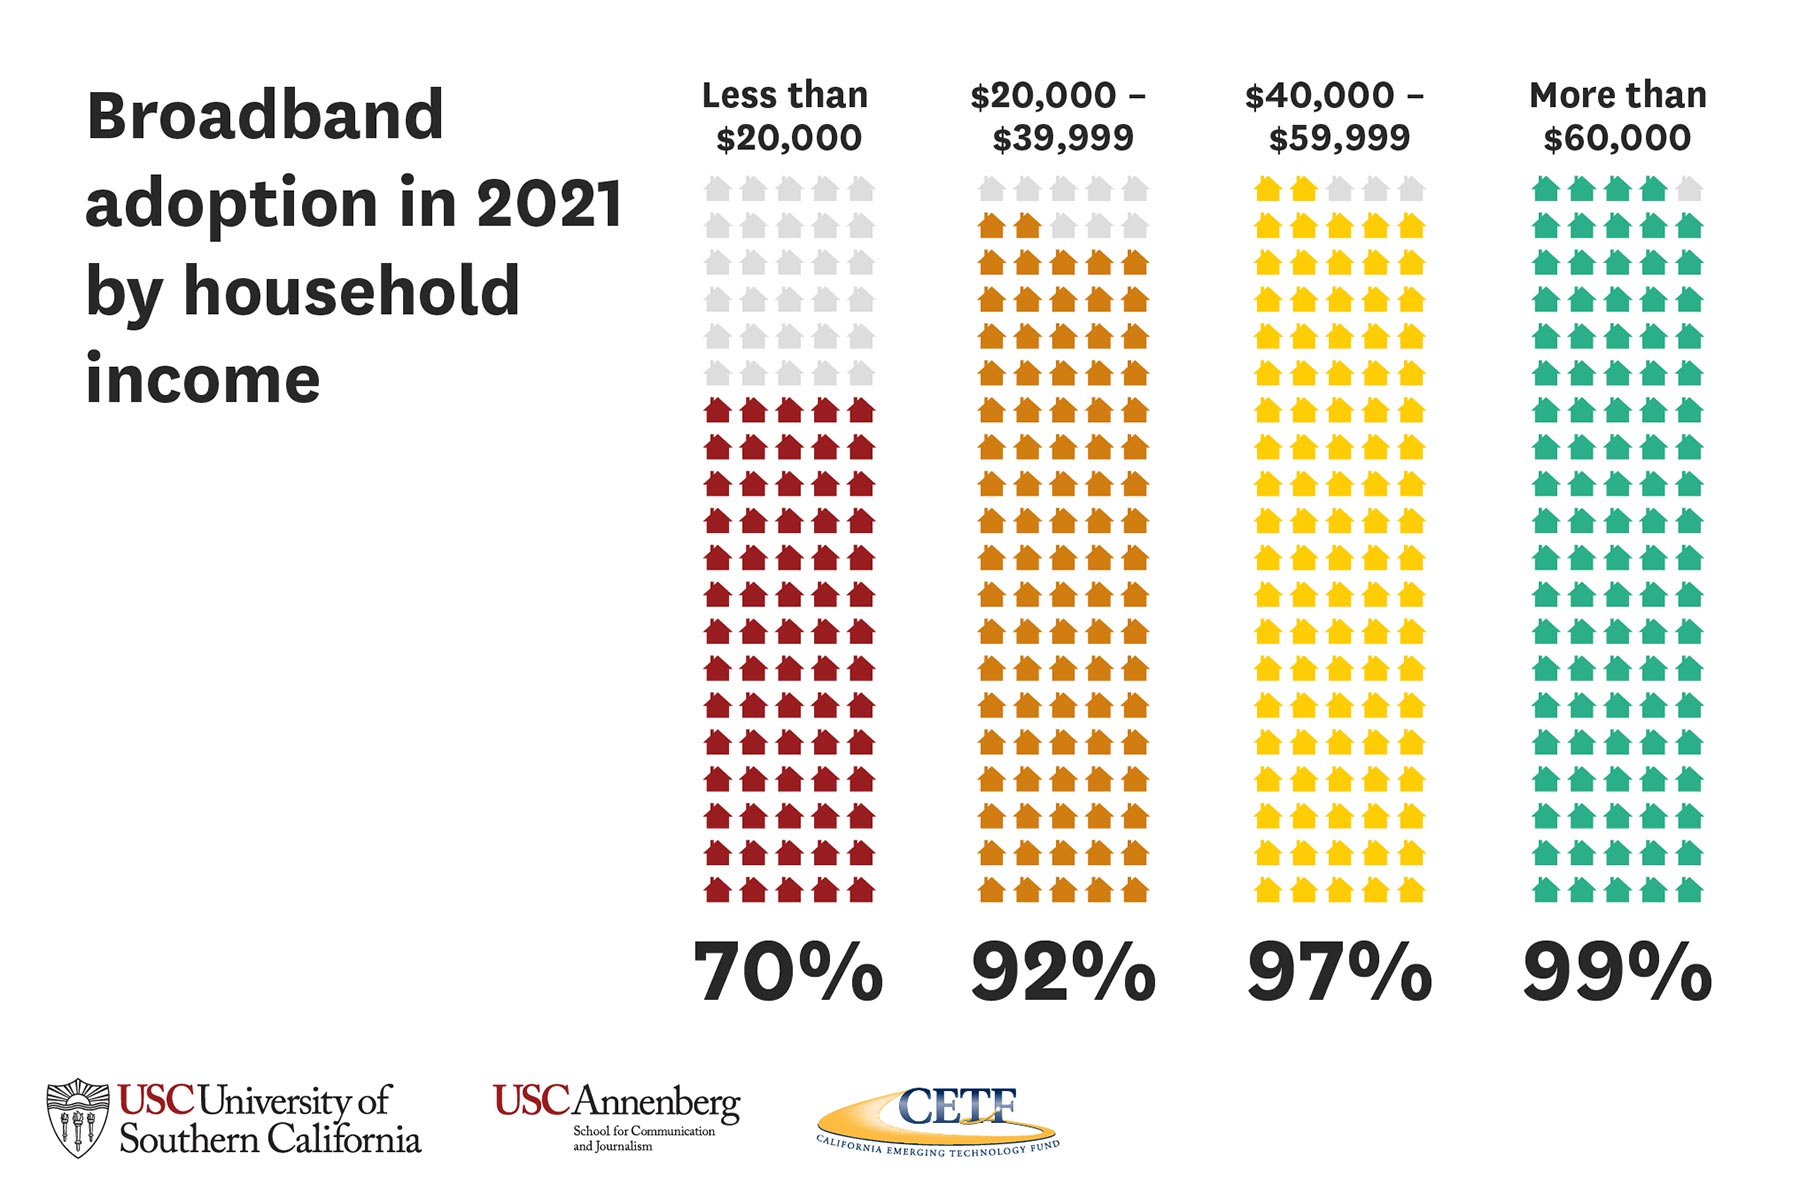 Broadband adoption in 2021 by household income